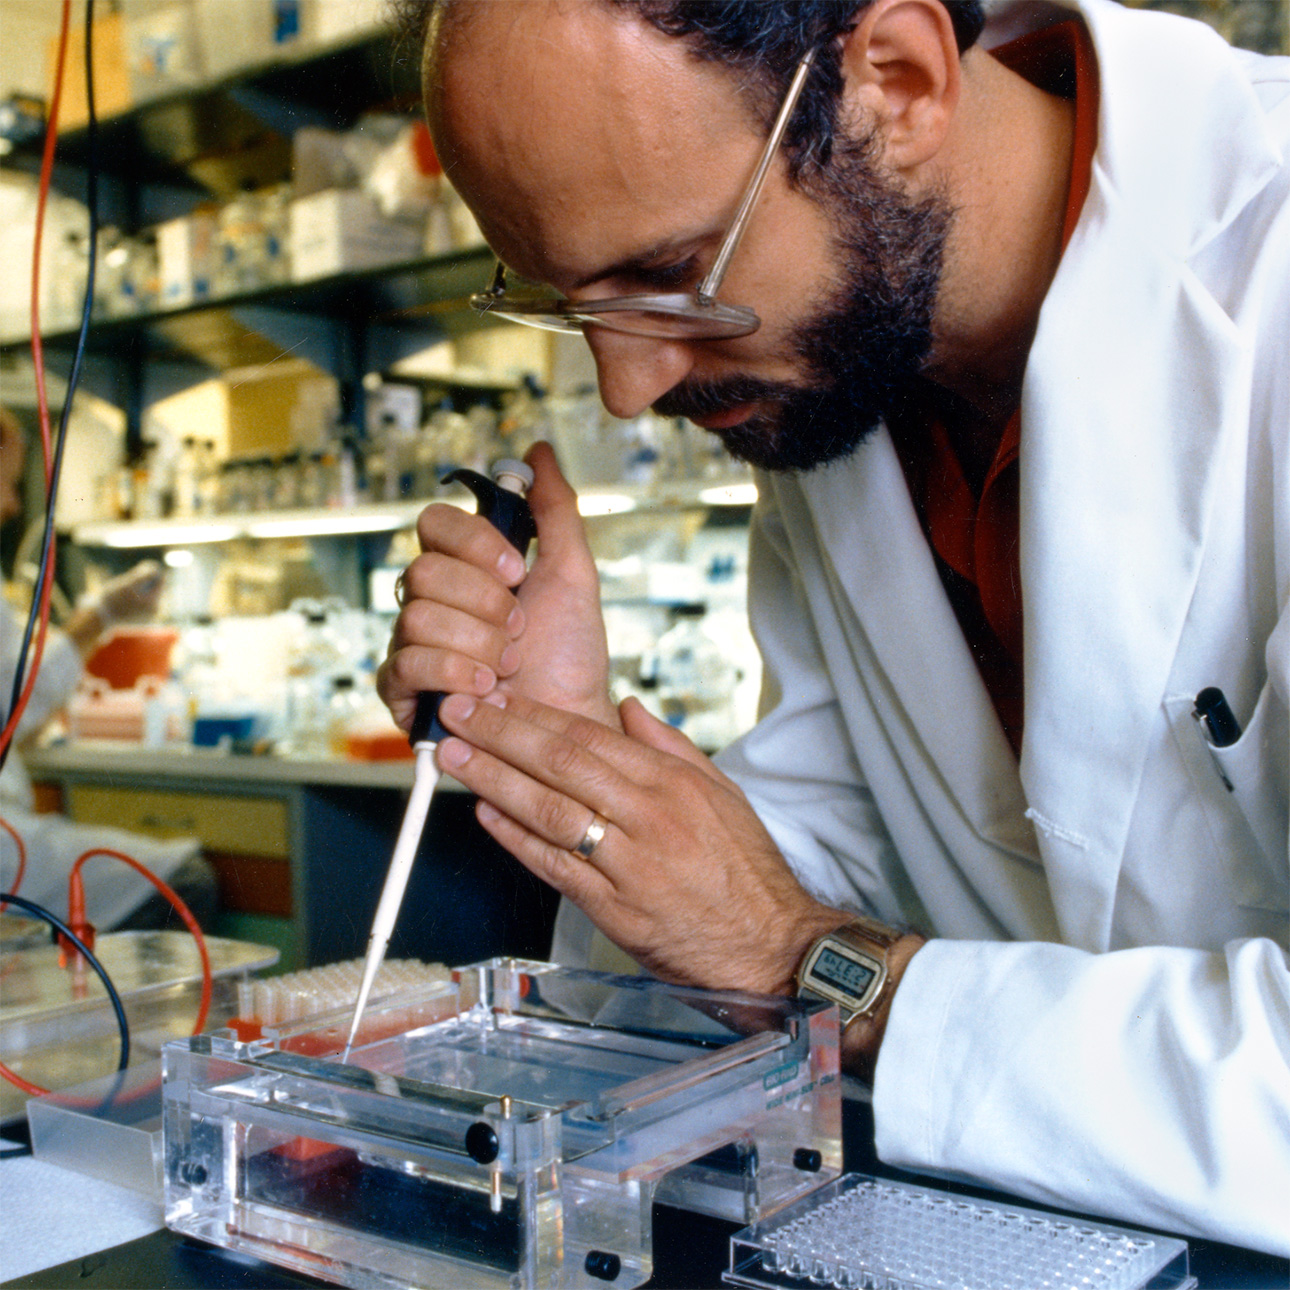 Researcher pipetting a DNA sample